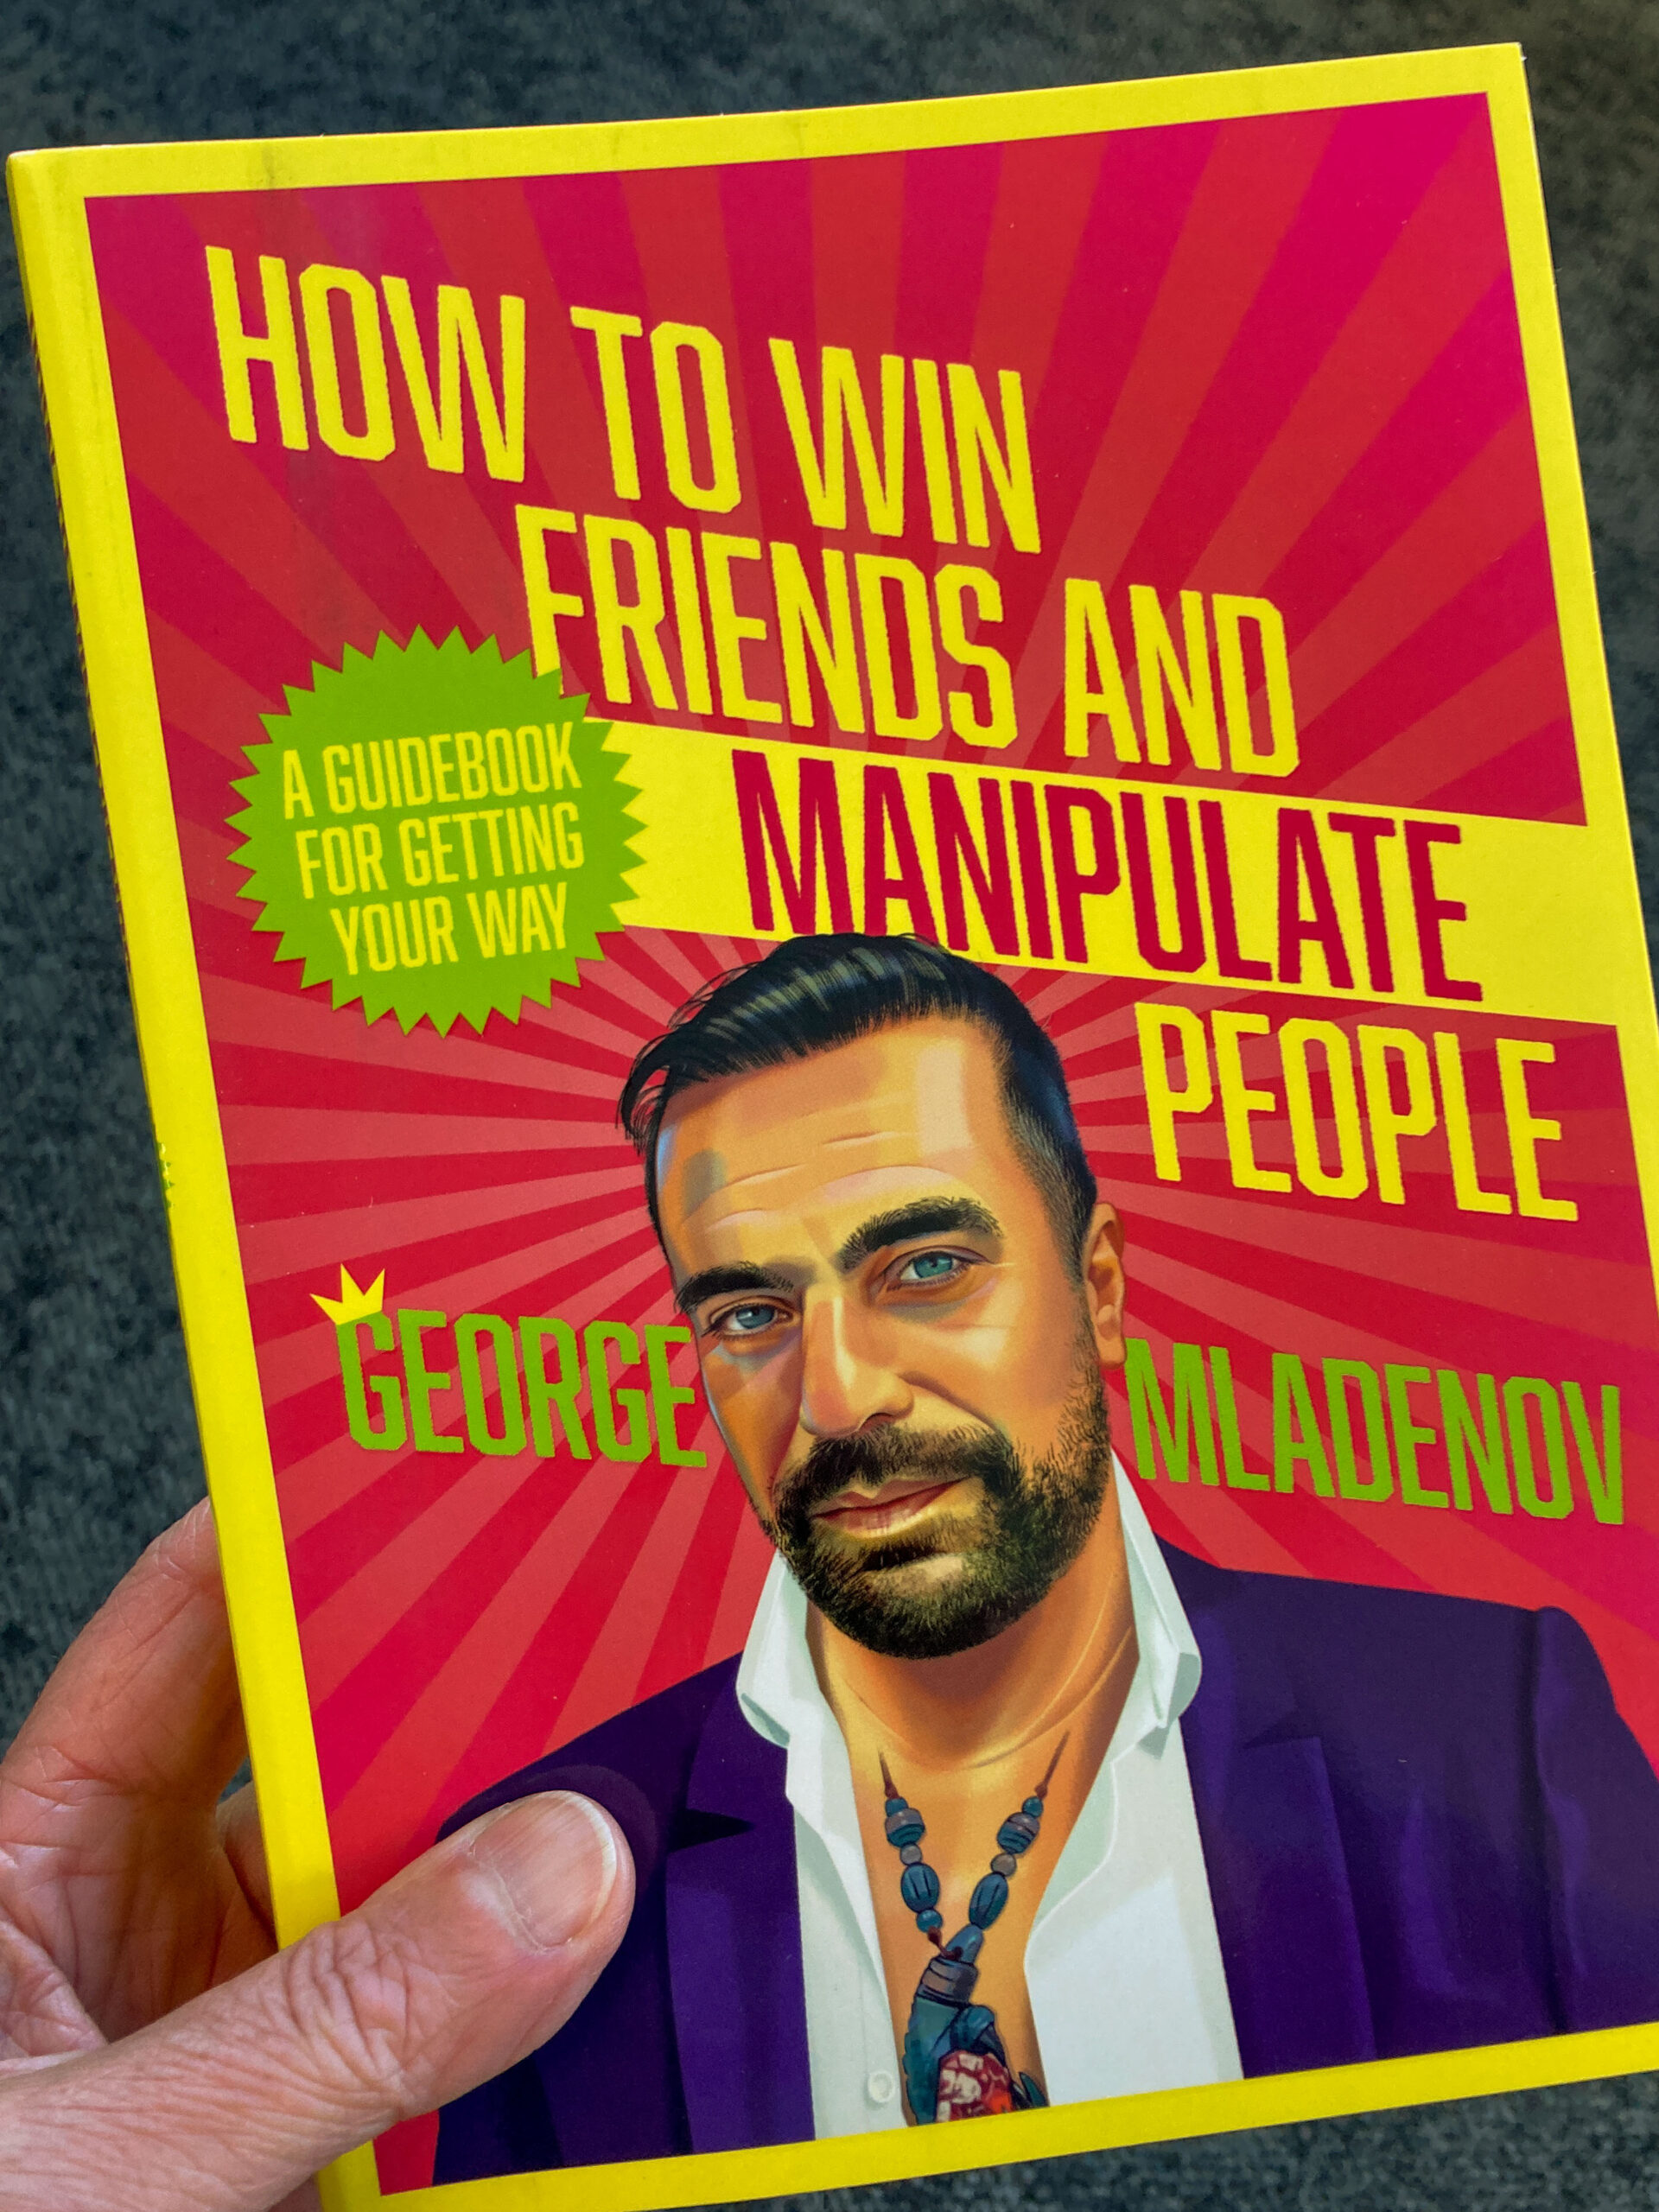 A pink book cover featuring a picture of a bearded man and the words in yellow uppercase letters HOW TO WIN FRIENDS AND MANIPULATE PEOPLE - George Mladenov